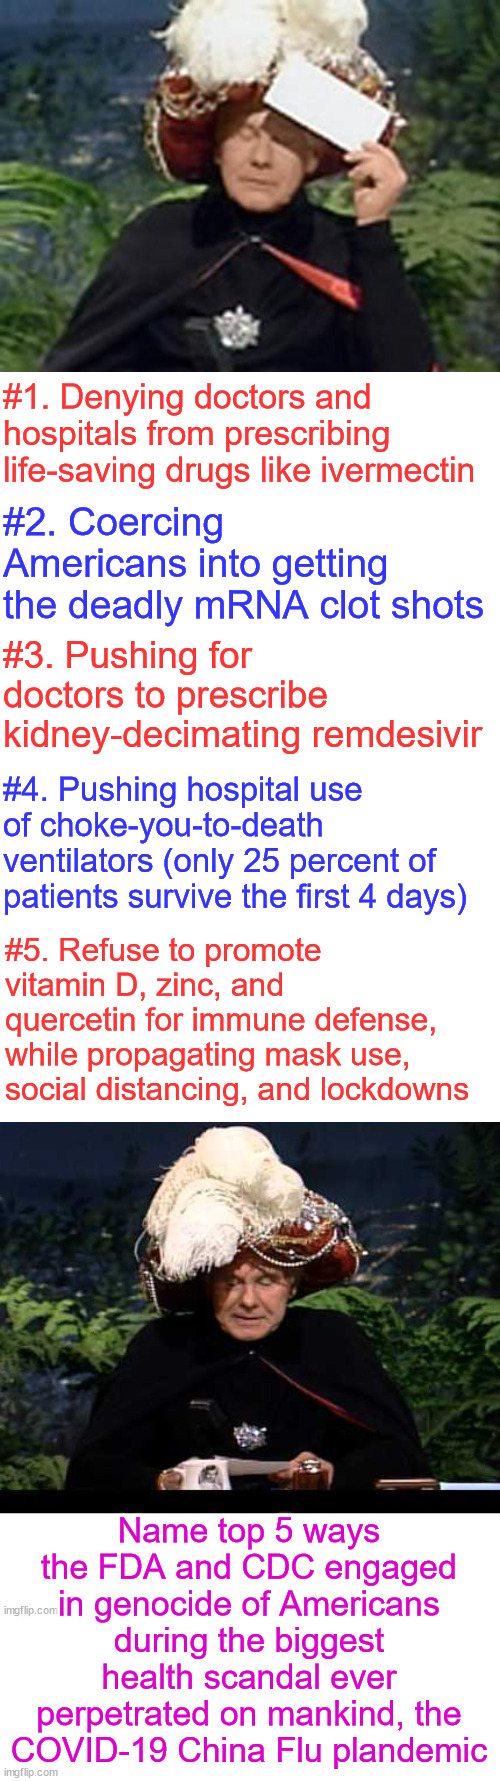 Premeditated | #1. Denying doctors and hospitals from prescribing life-saving drugs like ivermectin; #2. Coercing Americans into getting the deadly mRNA clot shots; #3. Pushing for doctors to prescribe kidney-decimating remdesivir; #4. Pushing hospital use of choke-you-to-death ventilators (only 25 percent of patients survive the first 4 days); #5. Refuse to promote vitamin D, zinc, and quercetin for immune defense, while propagating mask use, social distancing, and lockdowns; Name top 5 ways the FDA and CDC engaged in genocide of Americans during the biggest health scandal ever perpetrated on mankind, the COVID-19 China Flu plandemic | image tagged in carnac the magnificent,fda,cdc,complicit in genocide,plandemic,corrupt career bureaucrats | made w/ Imgflip meme maker